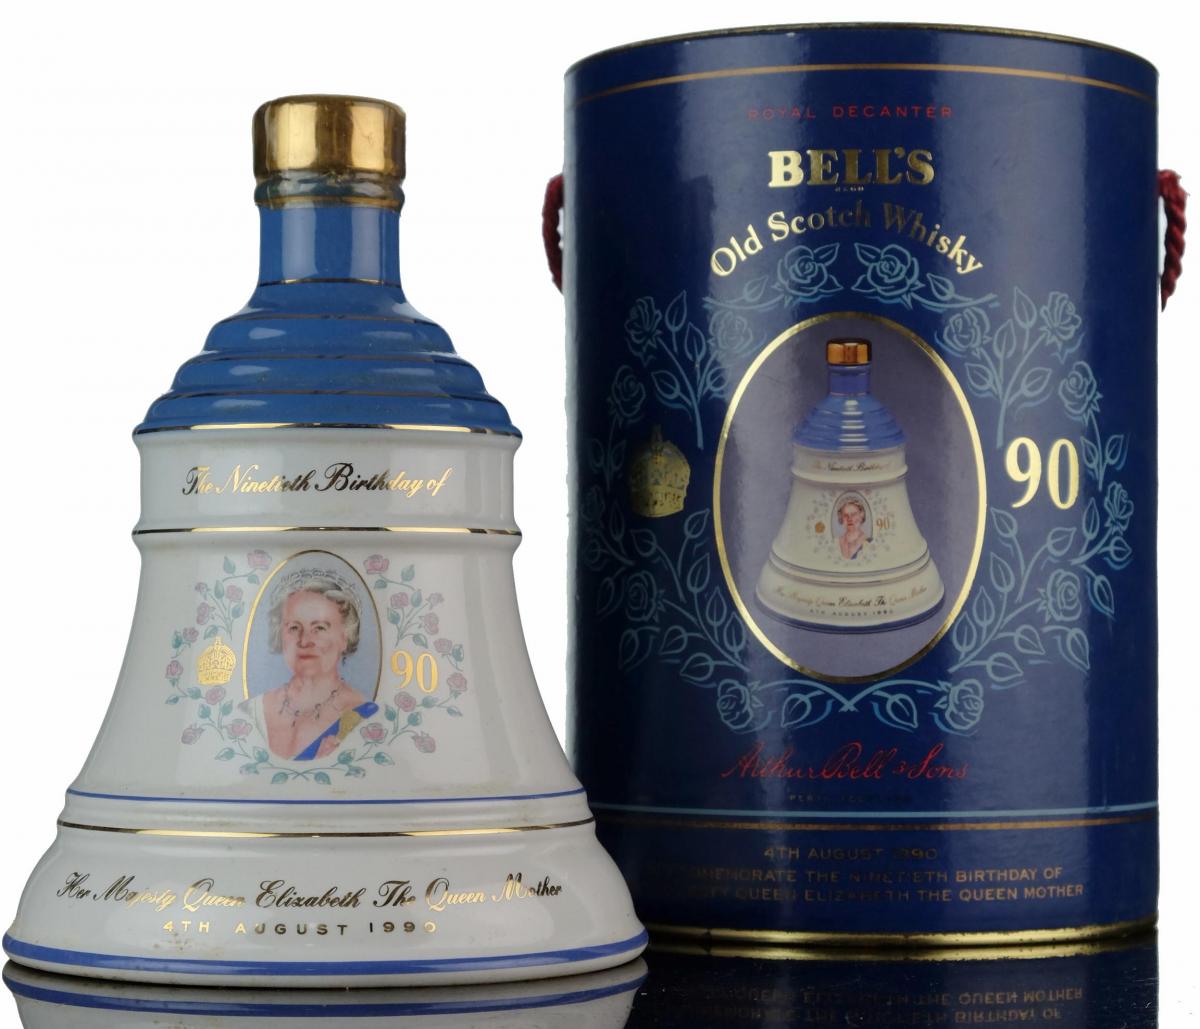 Bells To Celebrate The 90th Birthday Of The Queen Mother 4th August 1990